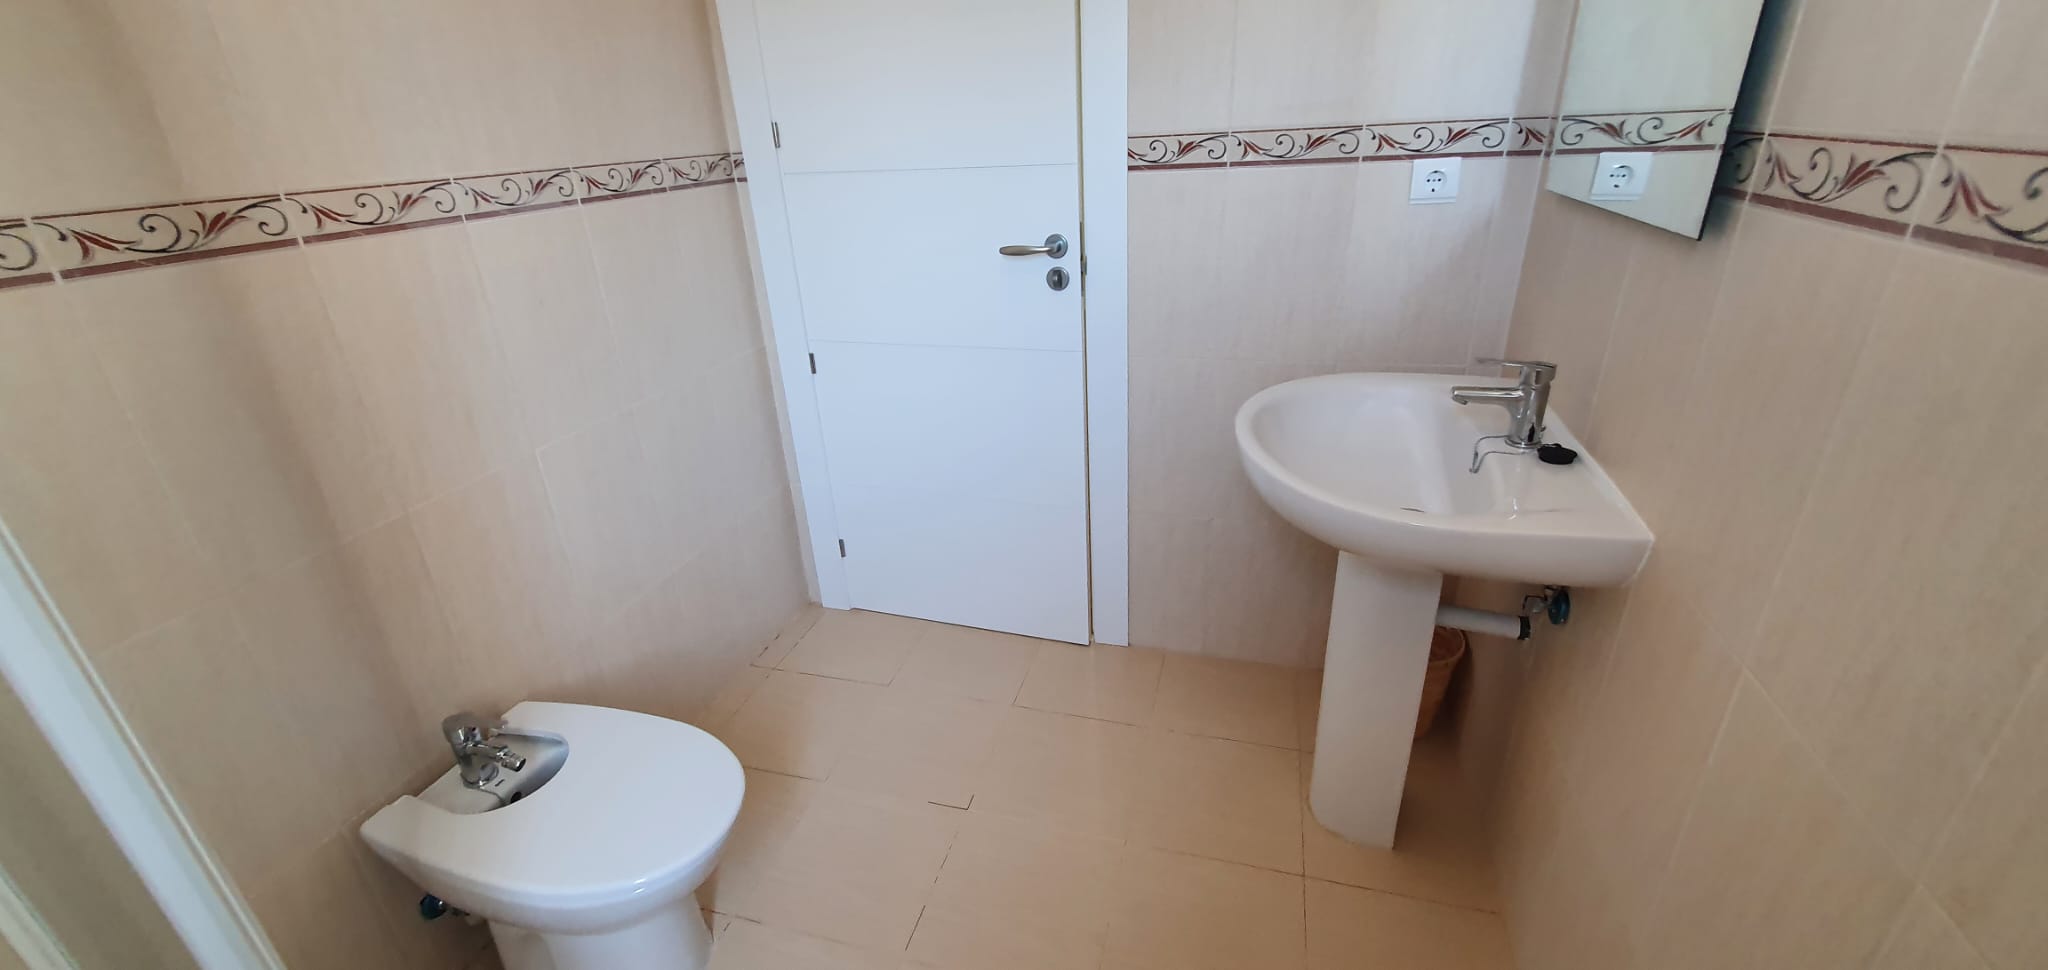 apartment for rent in Mancha Real - bathroom